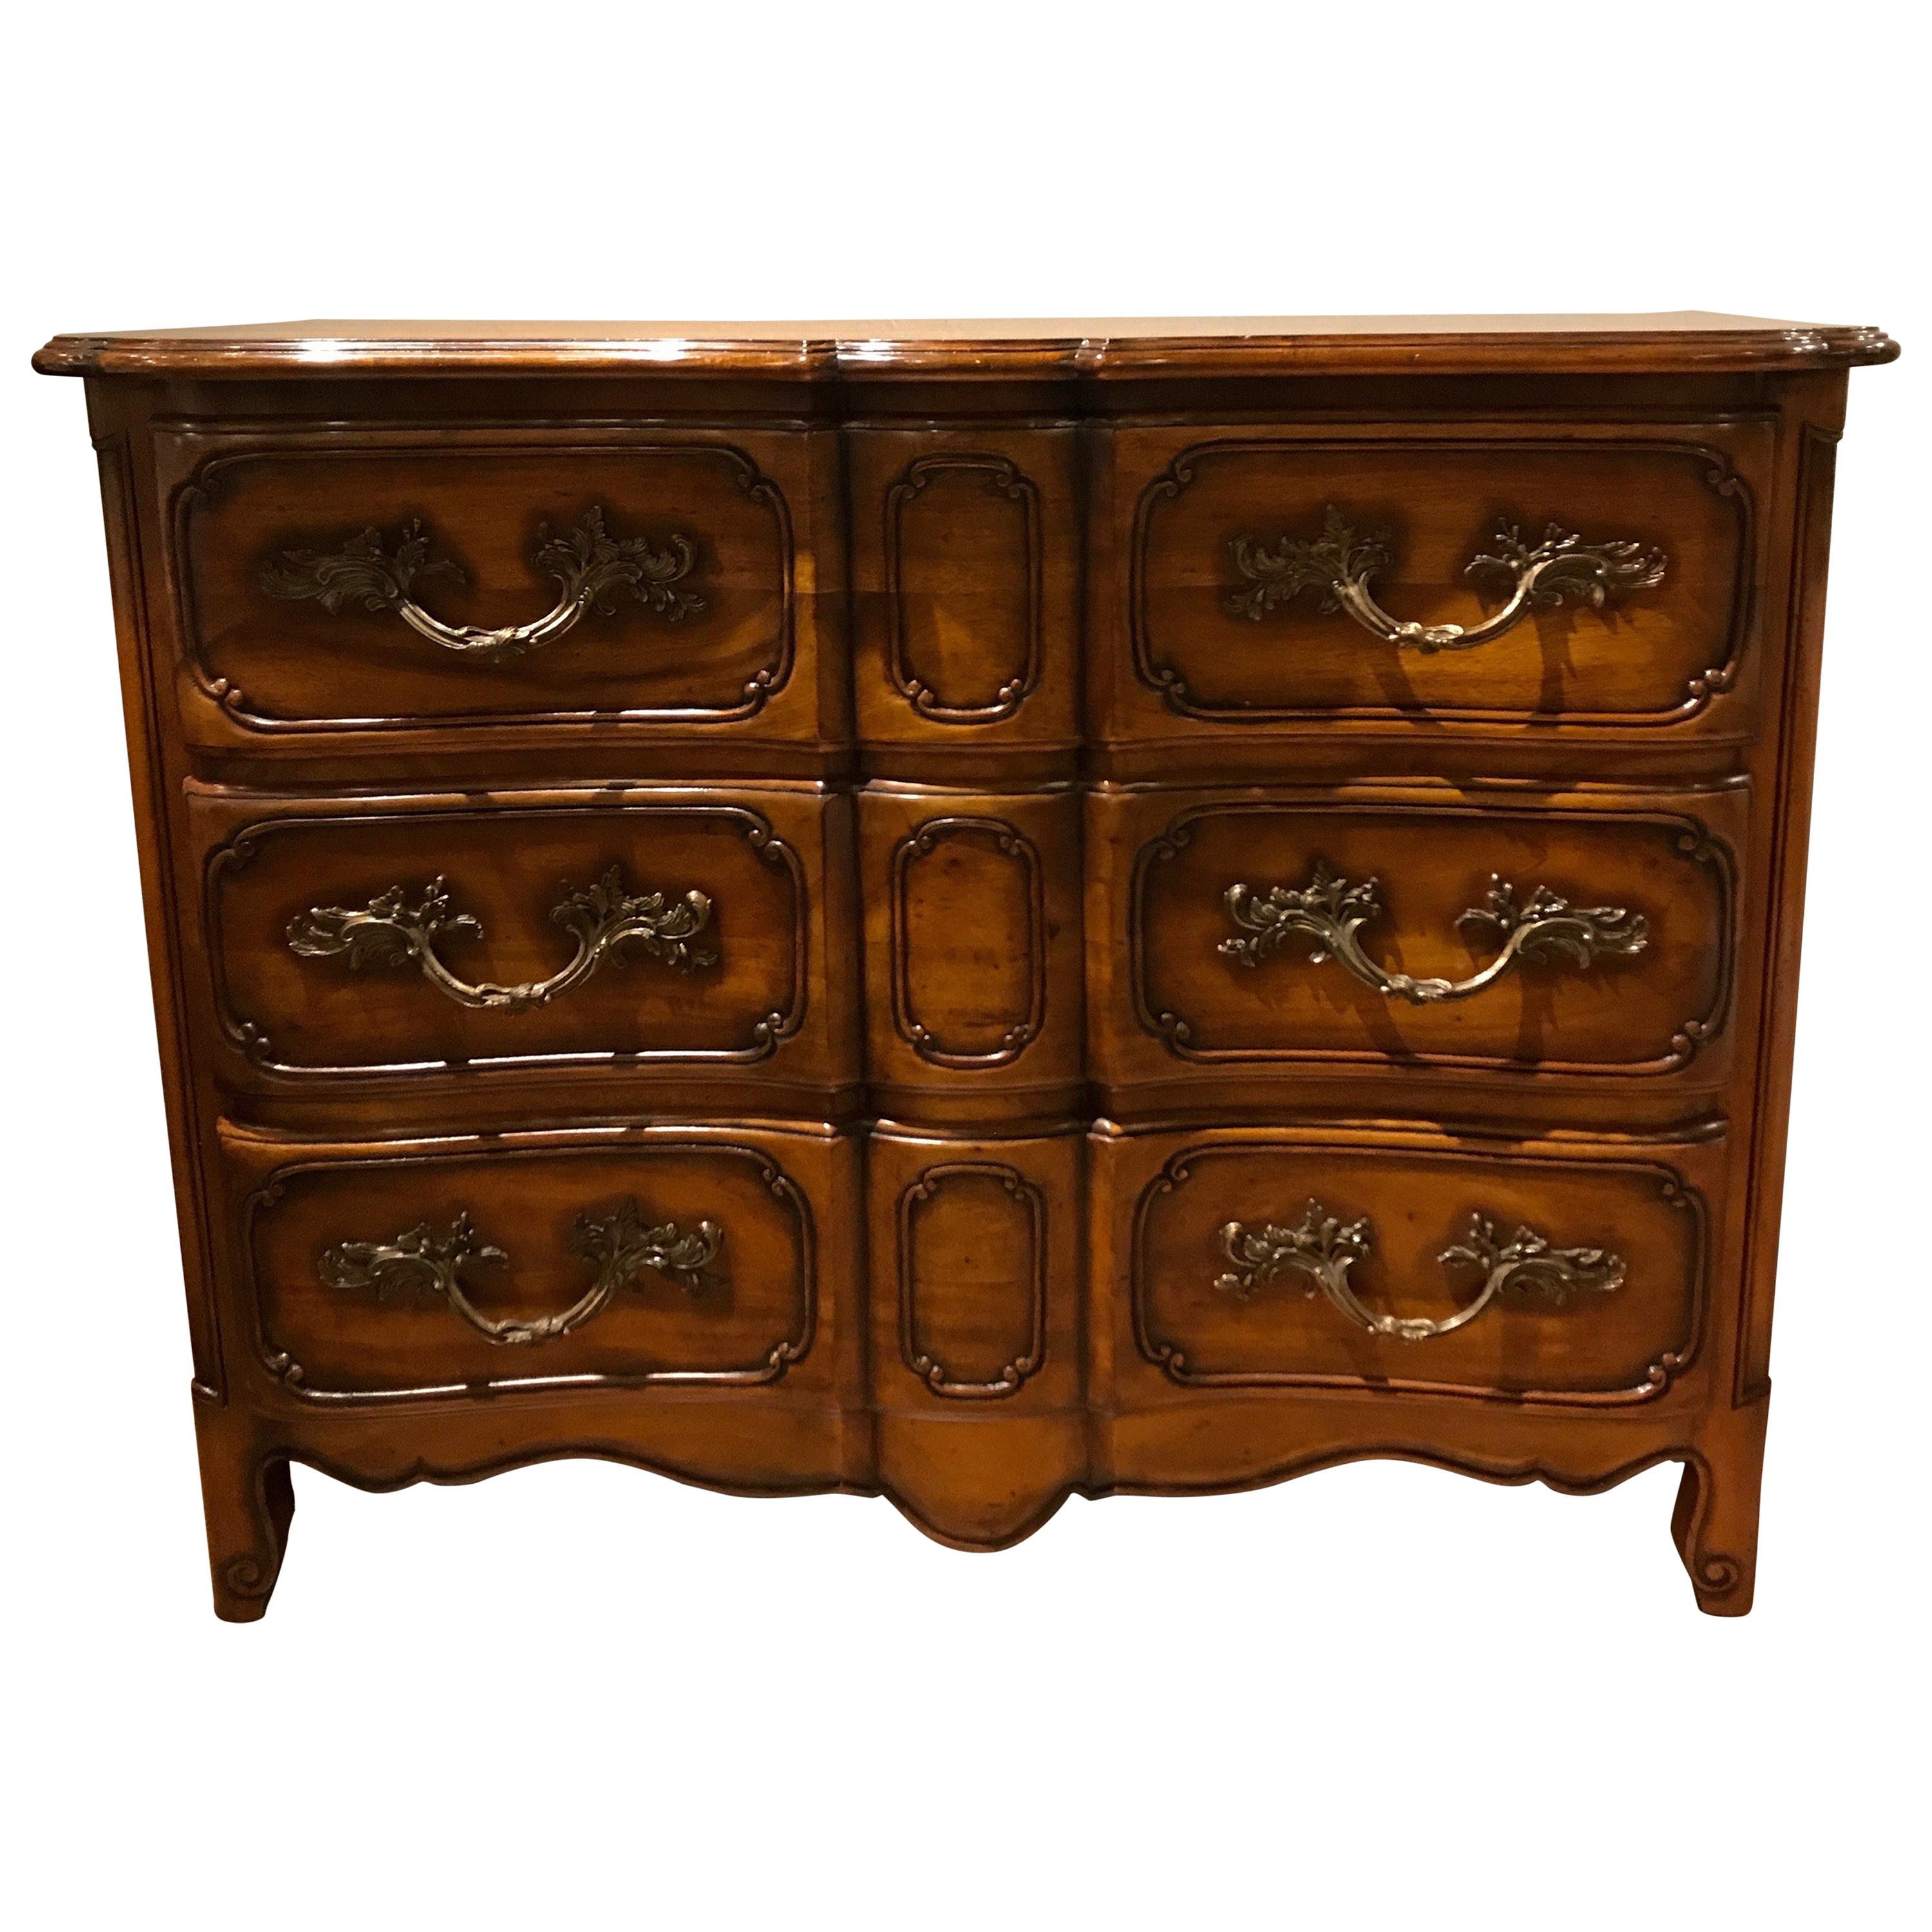 French Provincial Style Three-Drawer Commode